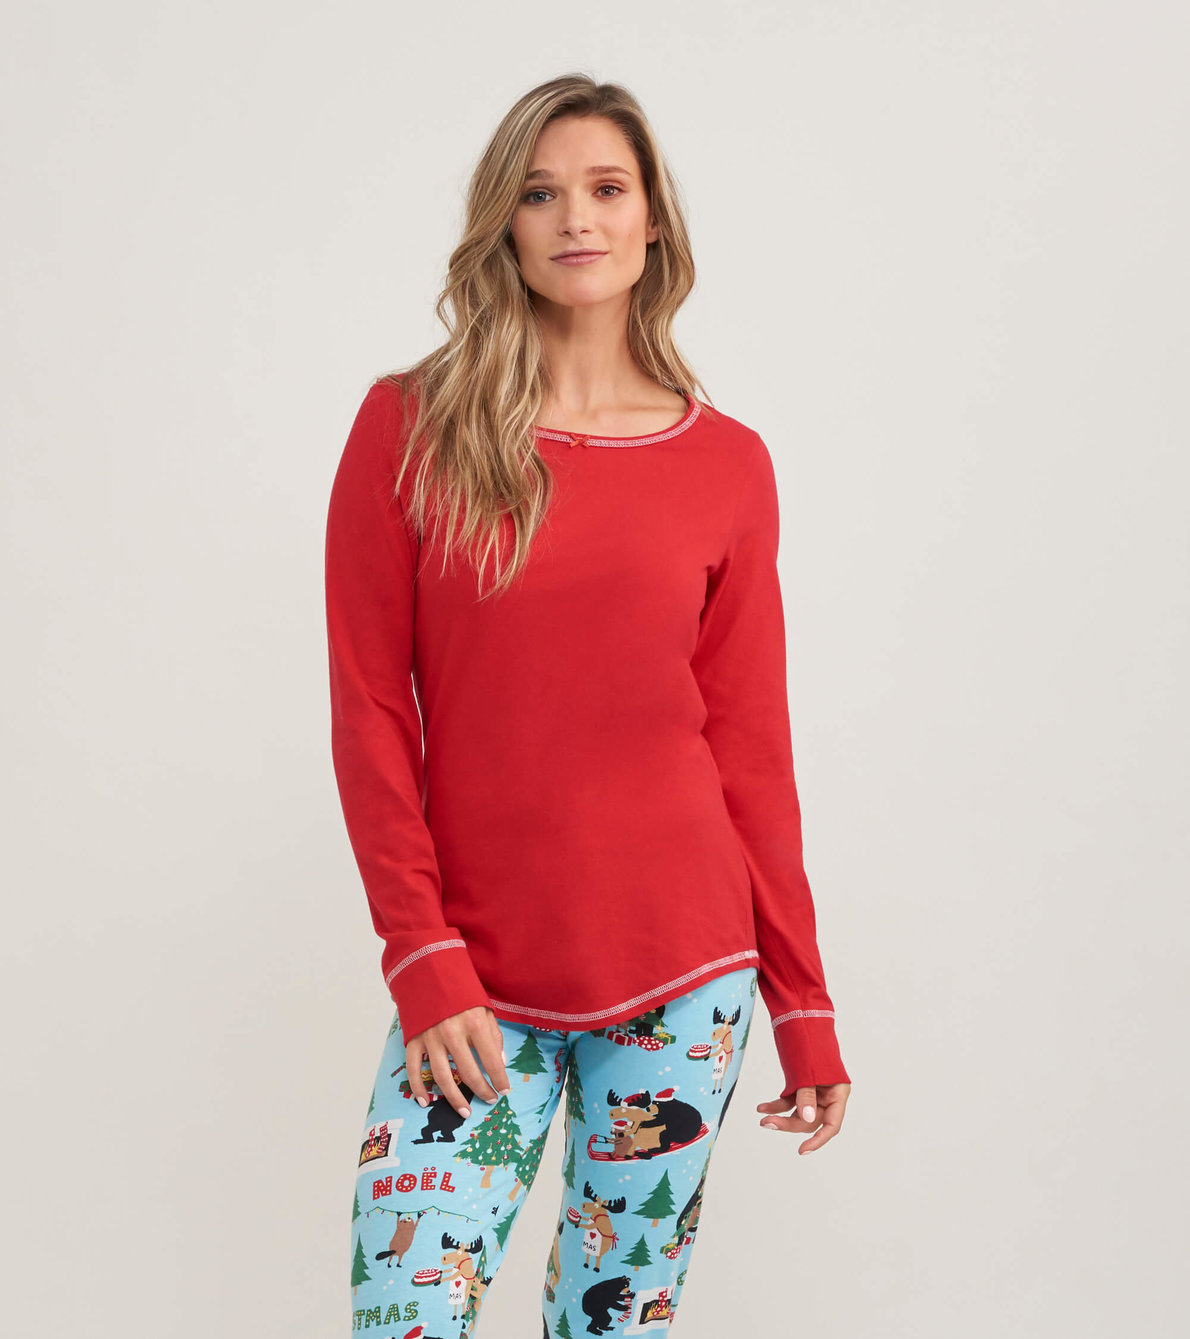 View larger image of Women's Red Long Sleeve Pajama Top